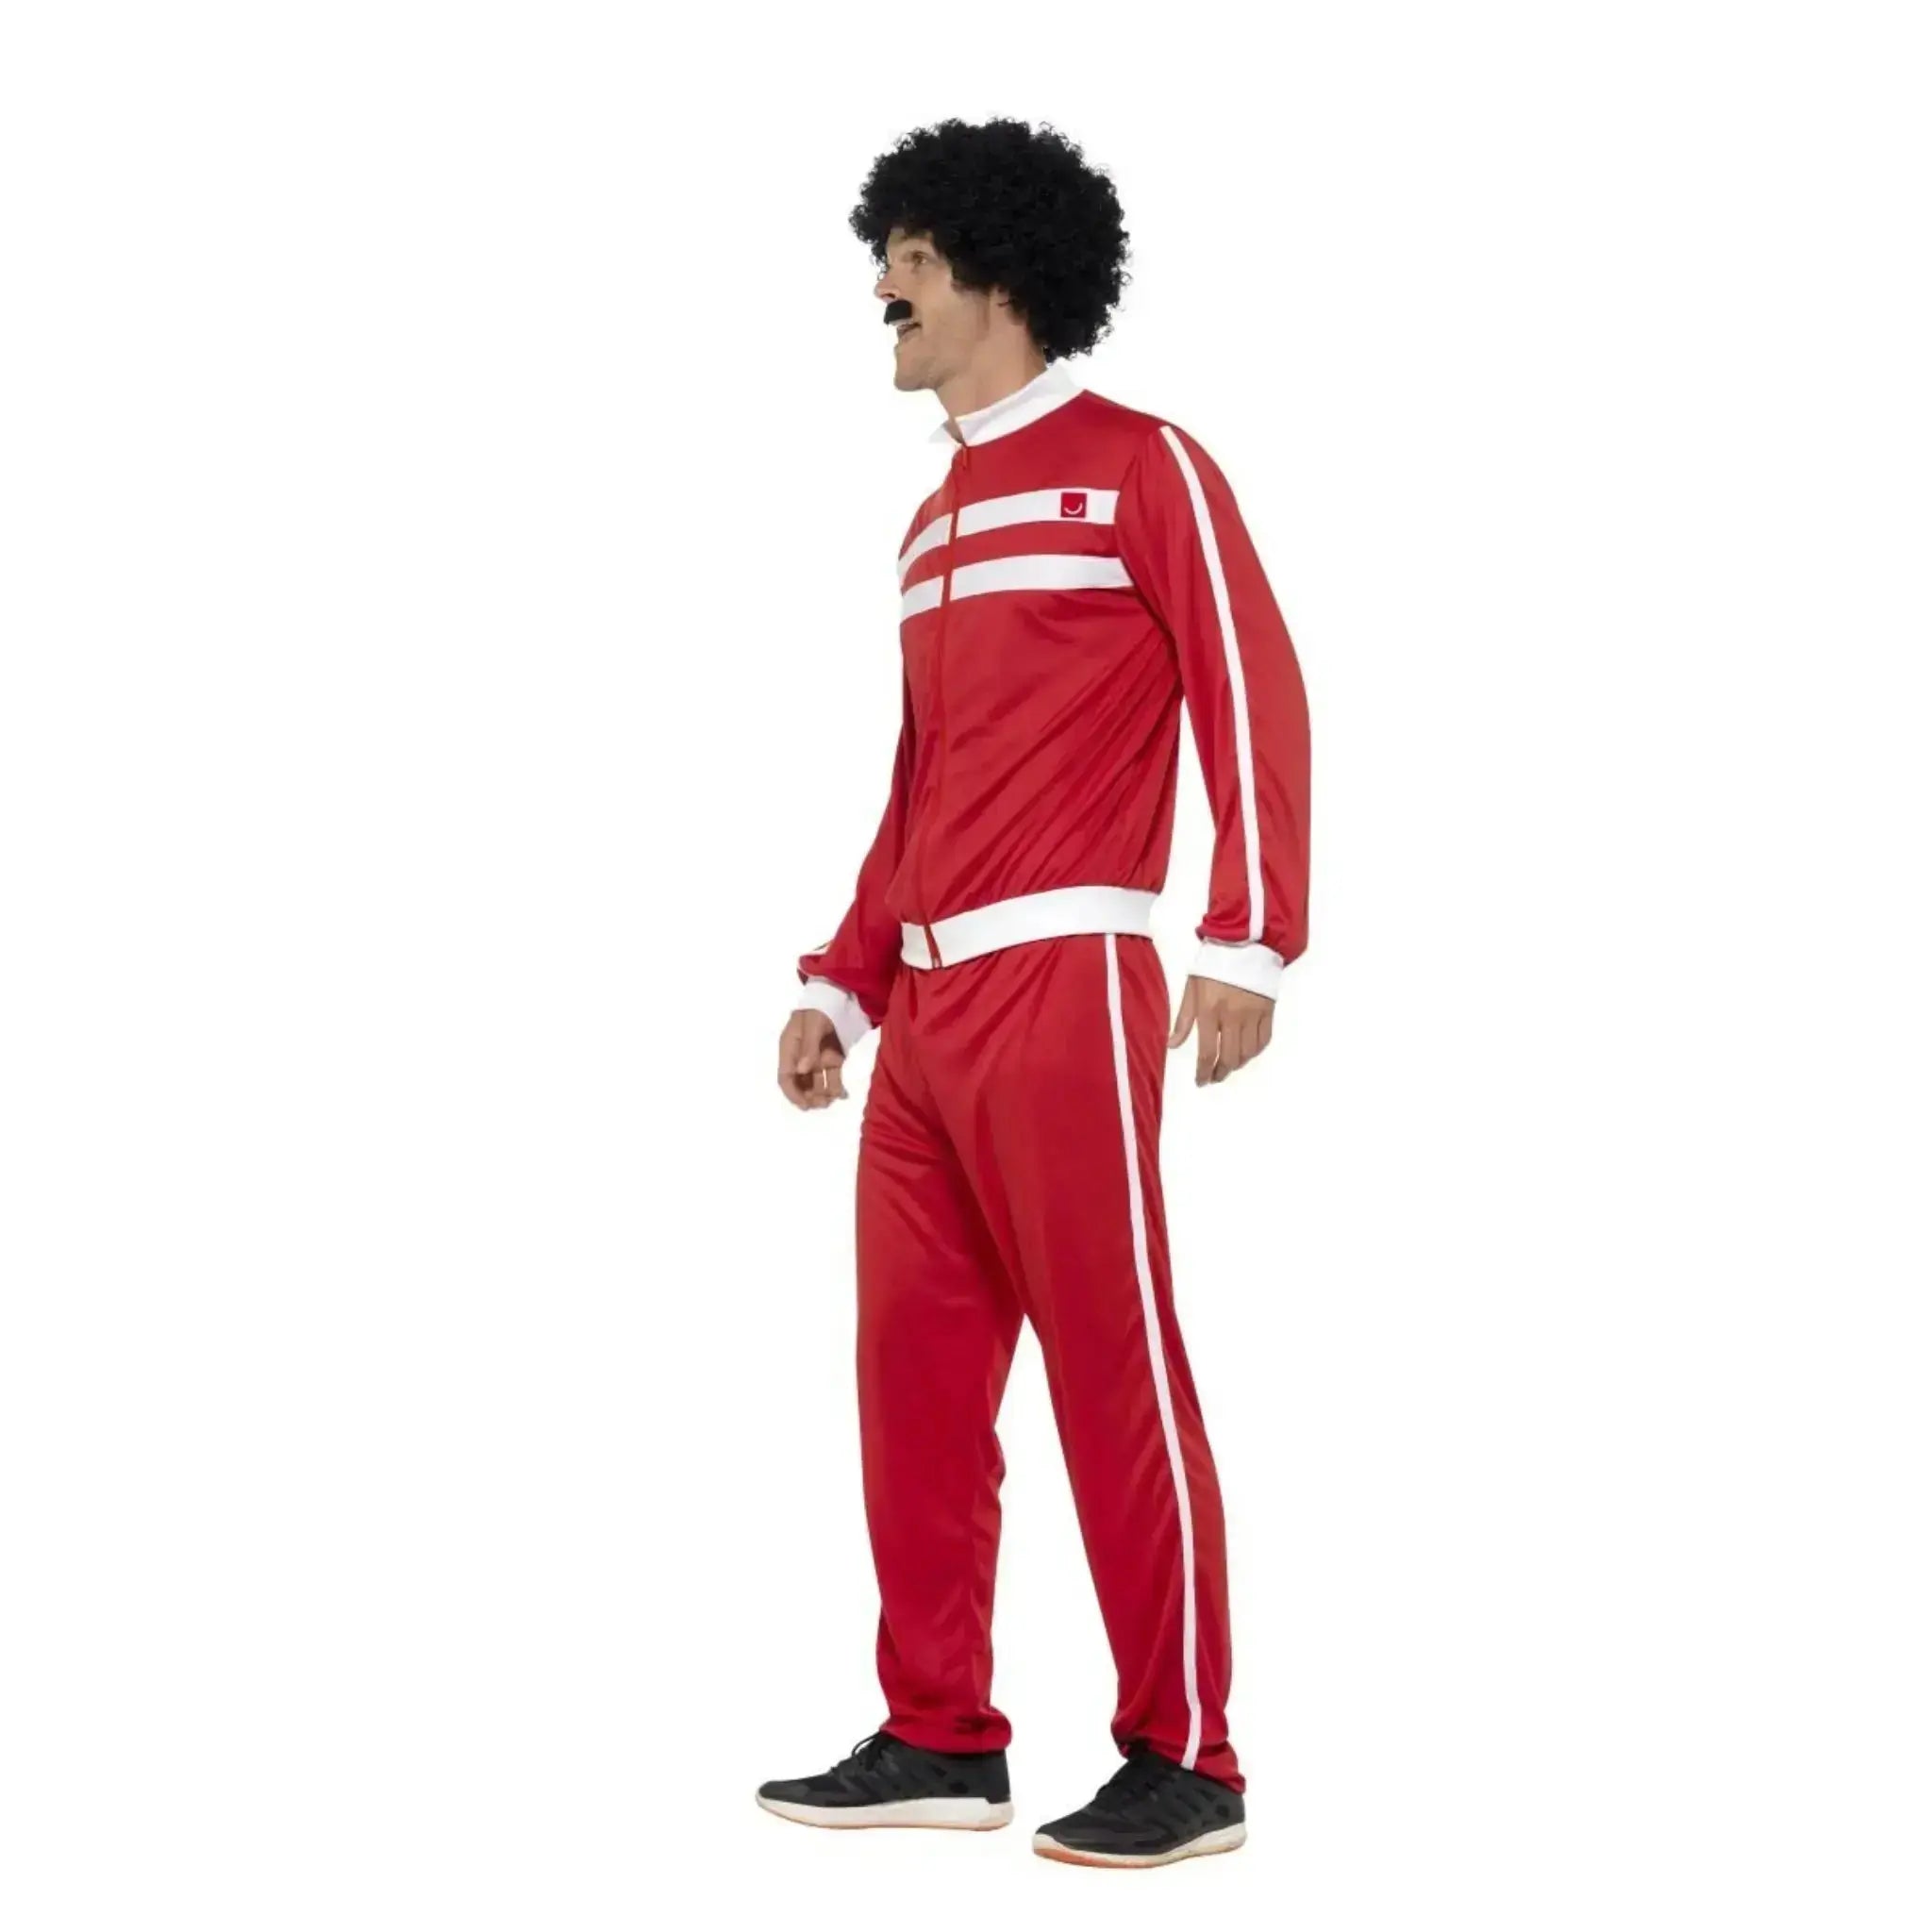 Scouser Tracksuit | The Party Hut